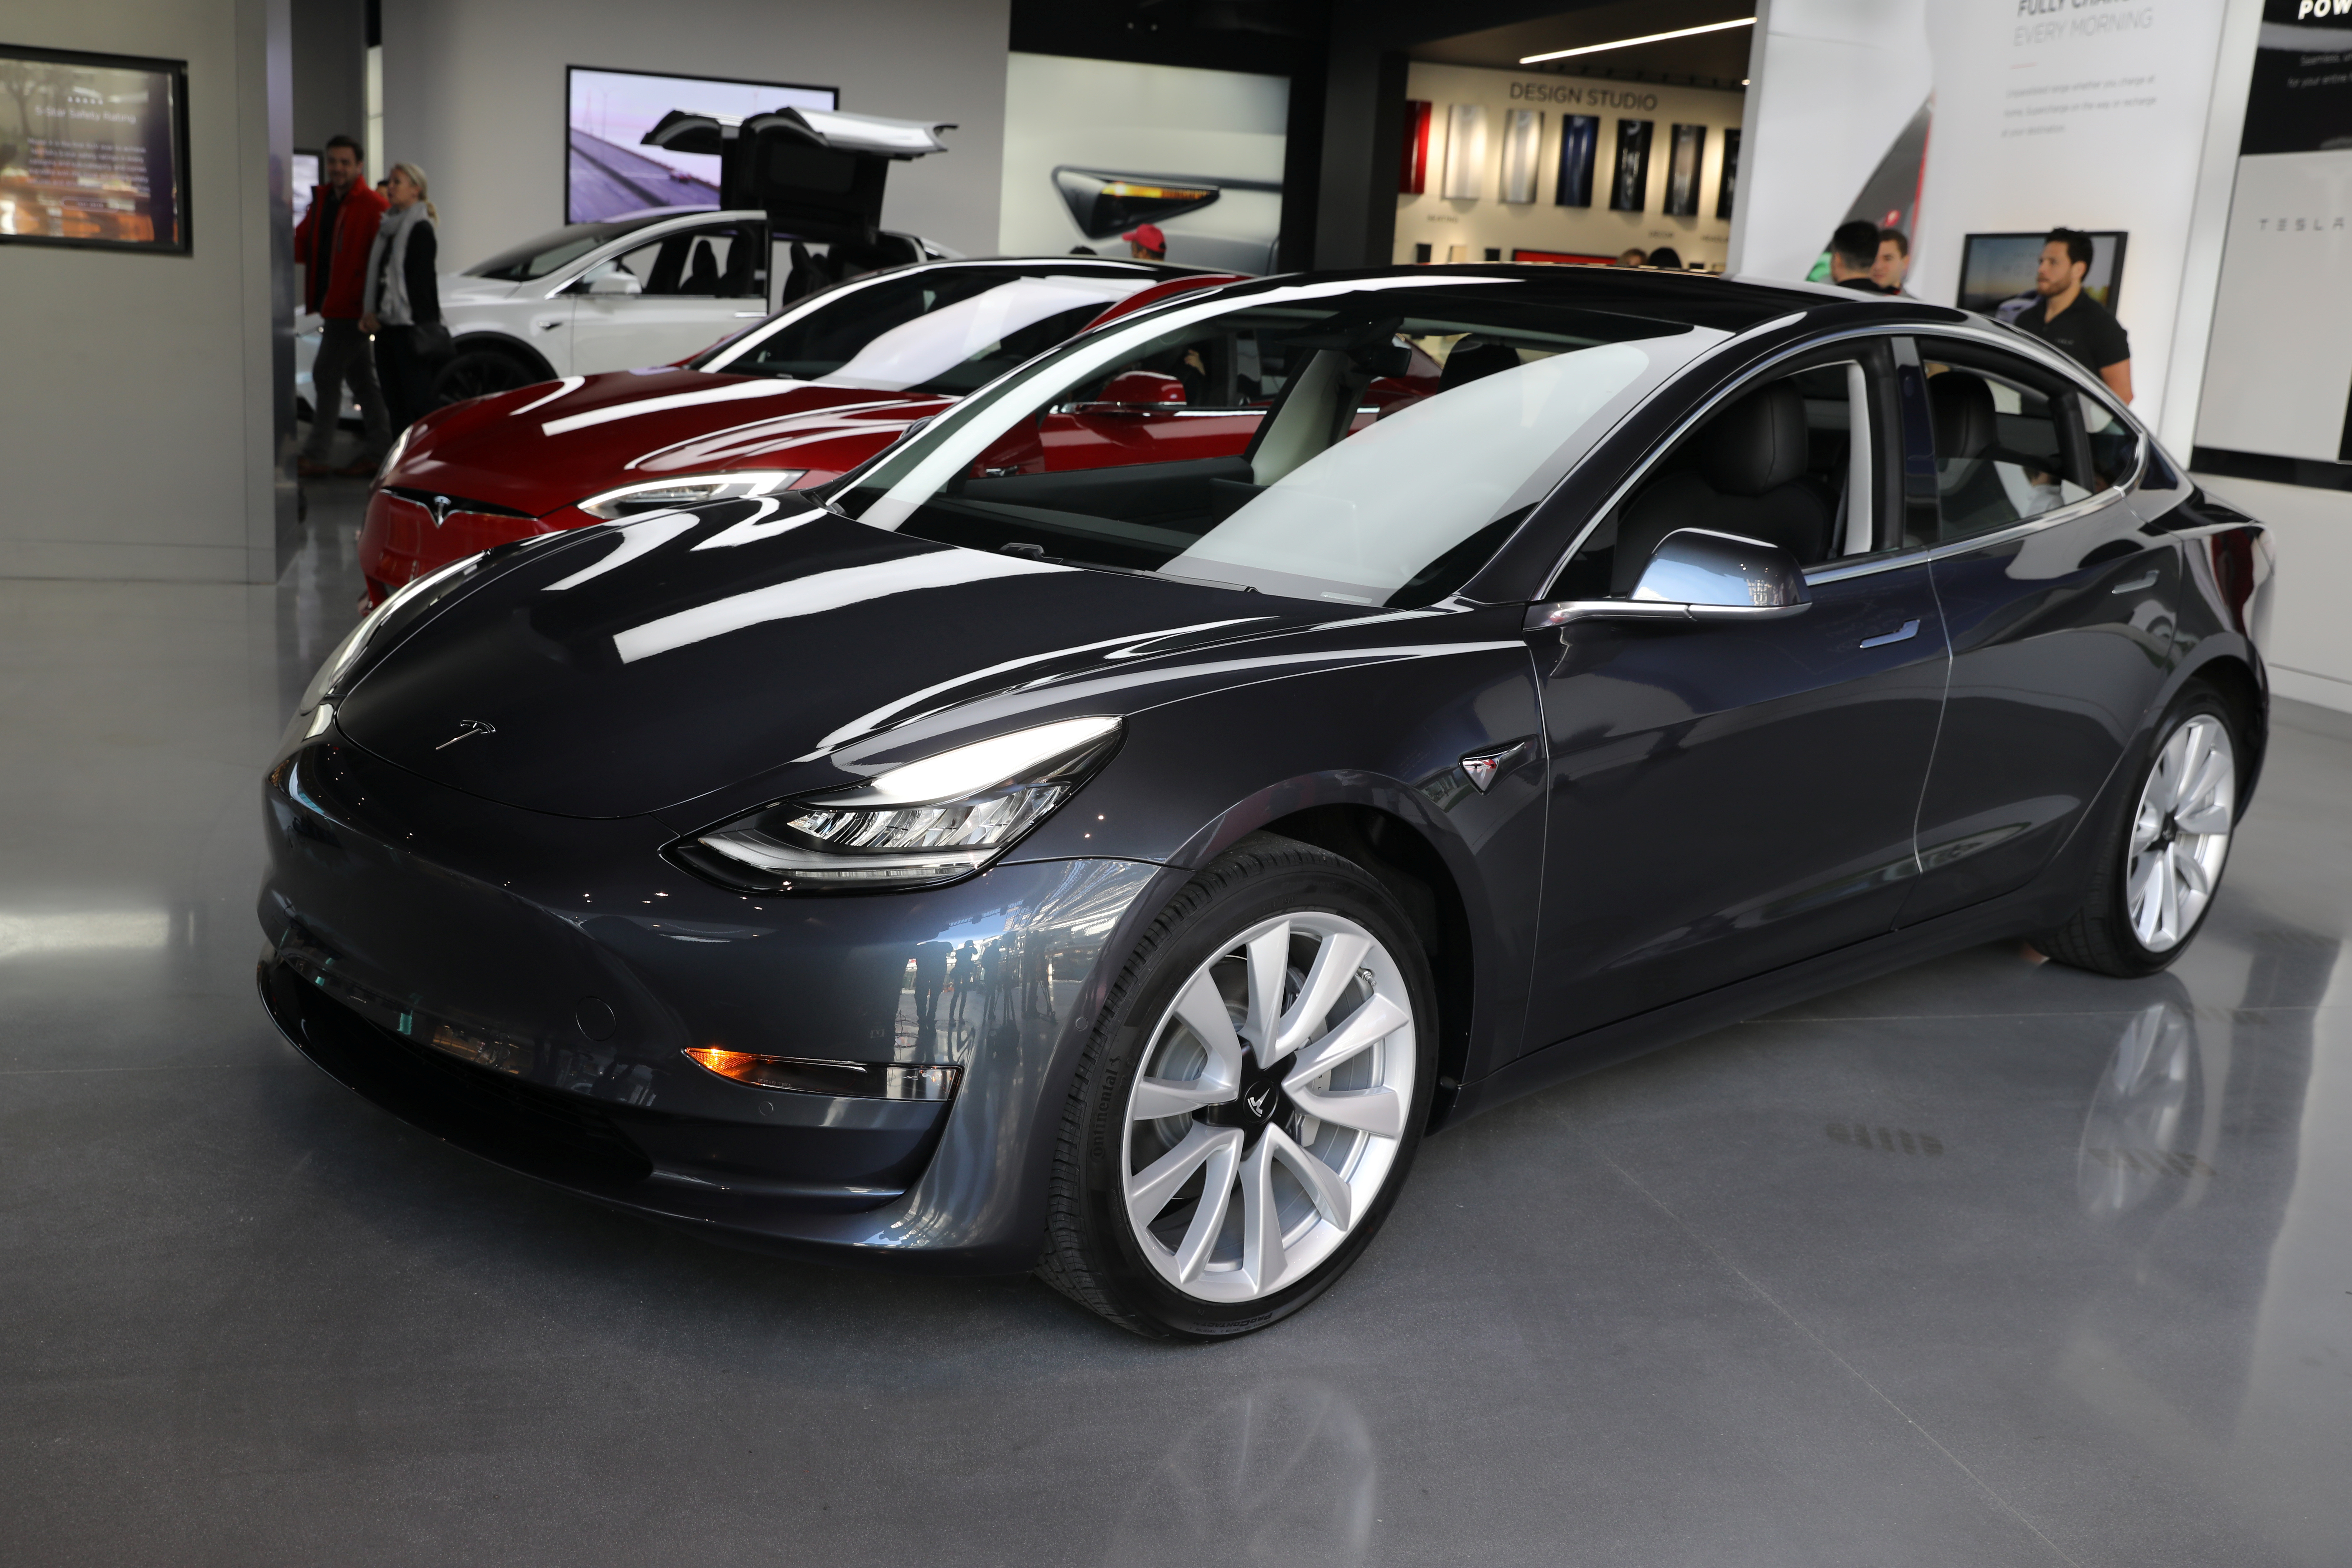 The Tesla Model 3 was spotted at a showroom in Los Angeles